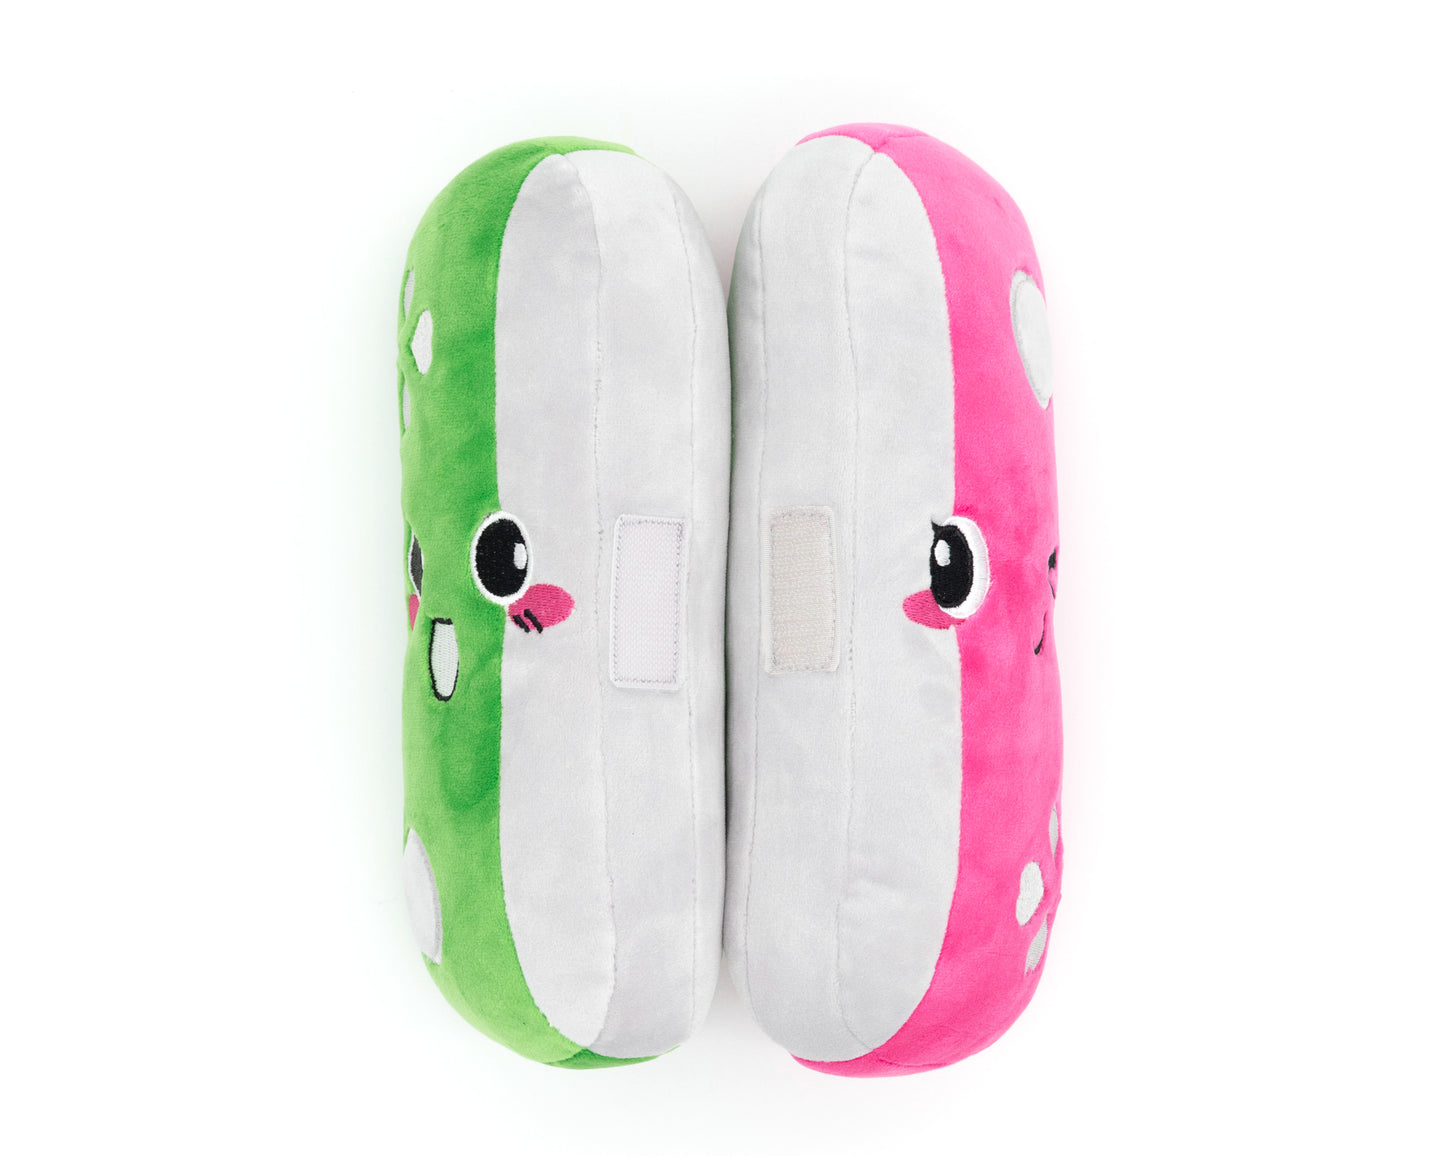 SALE! BFF Plushie - Game Controller - Pink Green